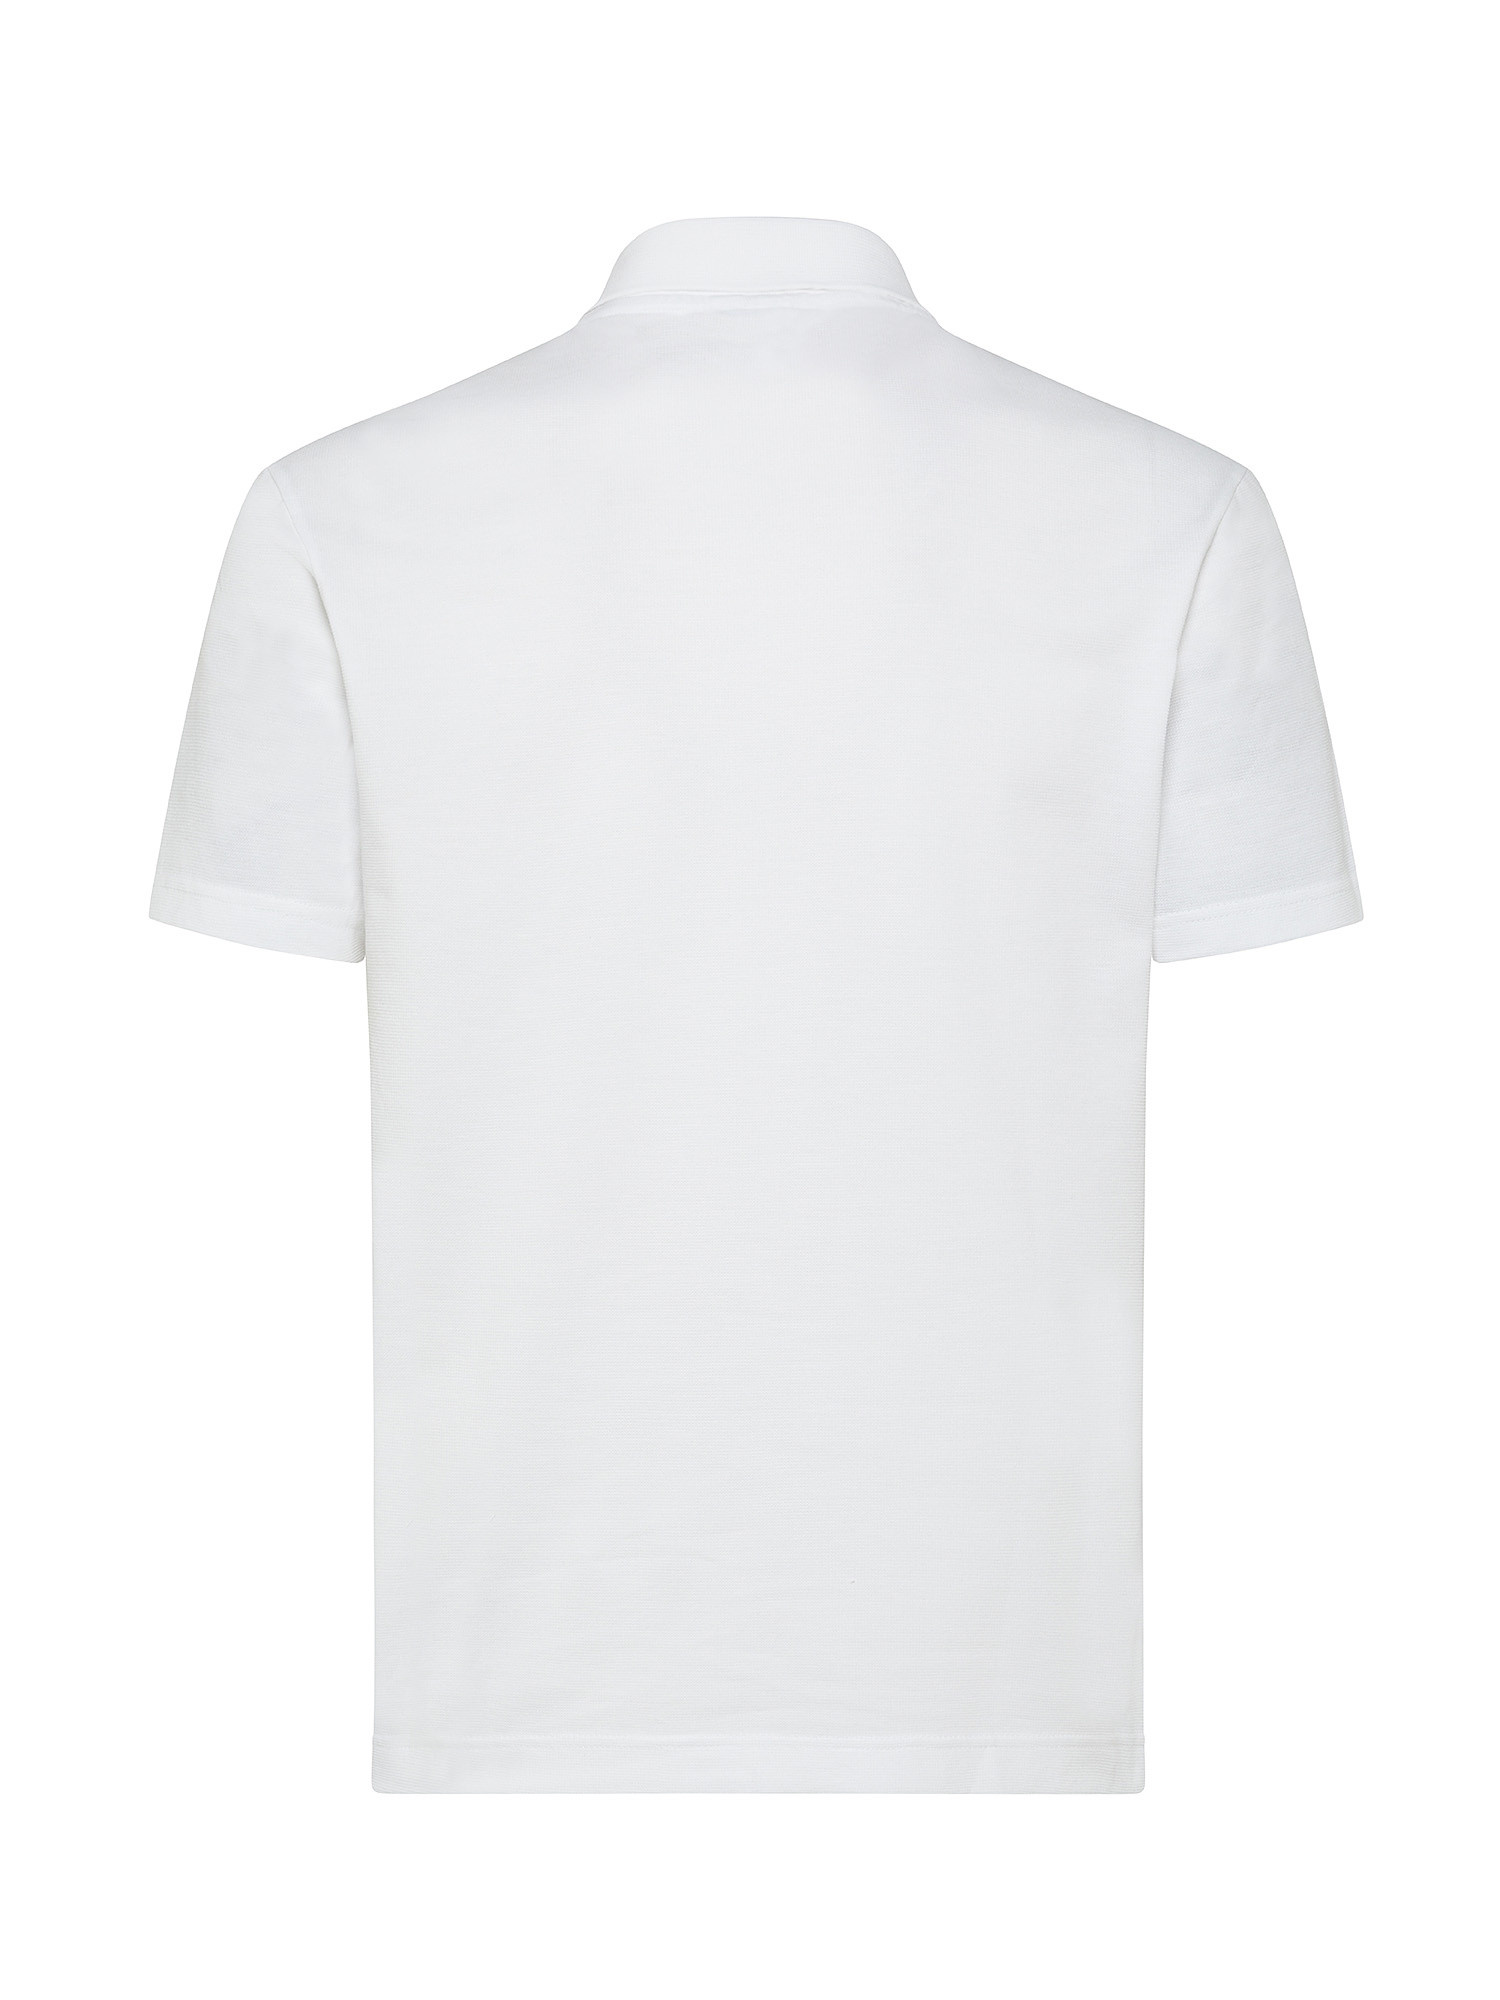 Lacoste - Regular fit stretch polo, White, large image number 1